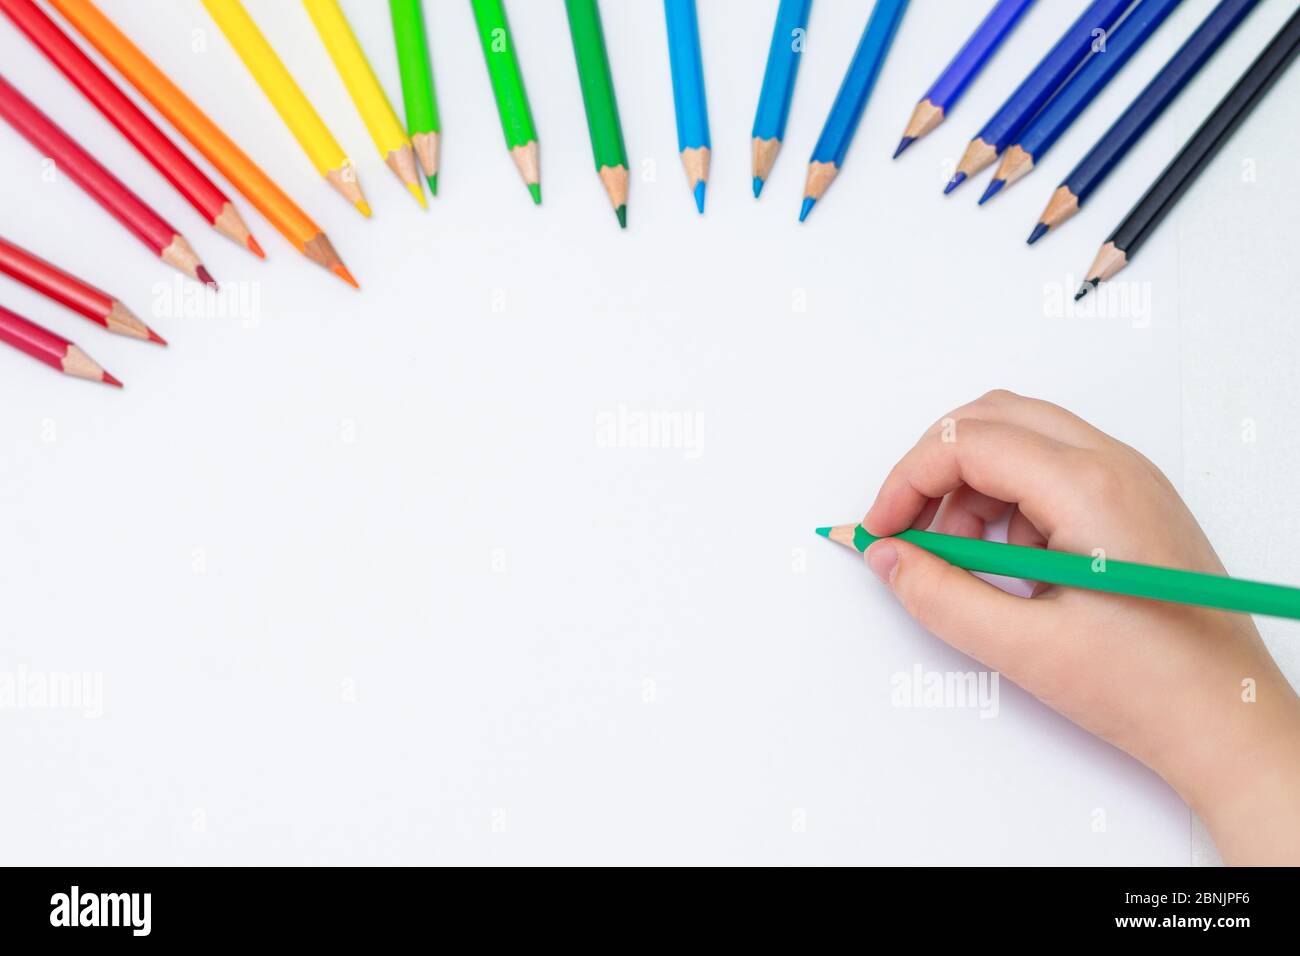 https://c8.alamy.com/comp/2BNJPF6/top-view-of-babys-hand-drawing-with-green-pencil-on-white-paper-with-the-set-of-colour-pencils-kids-painting-concept-copy-space-for-text-mockup-2BNJPF6.jpg